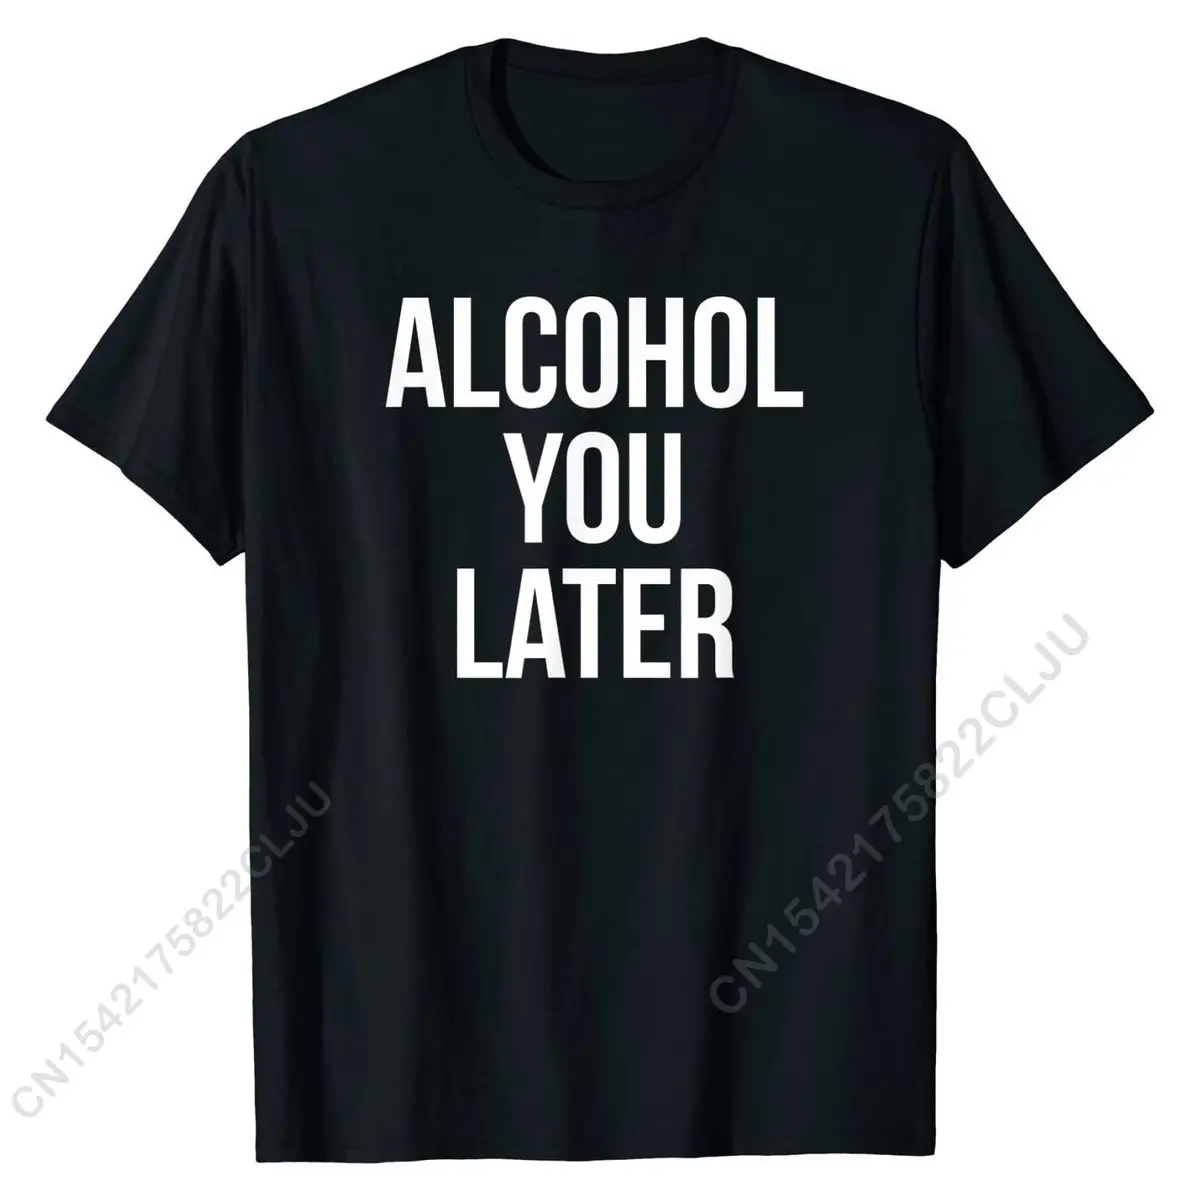 

Alcohol You Later T-shirt Printed On Tops Men Tees Cotton Young Tshirts Printed On Plain